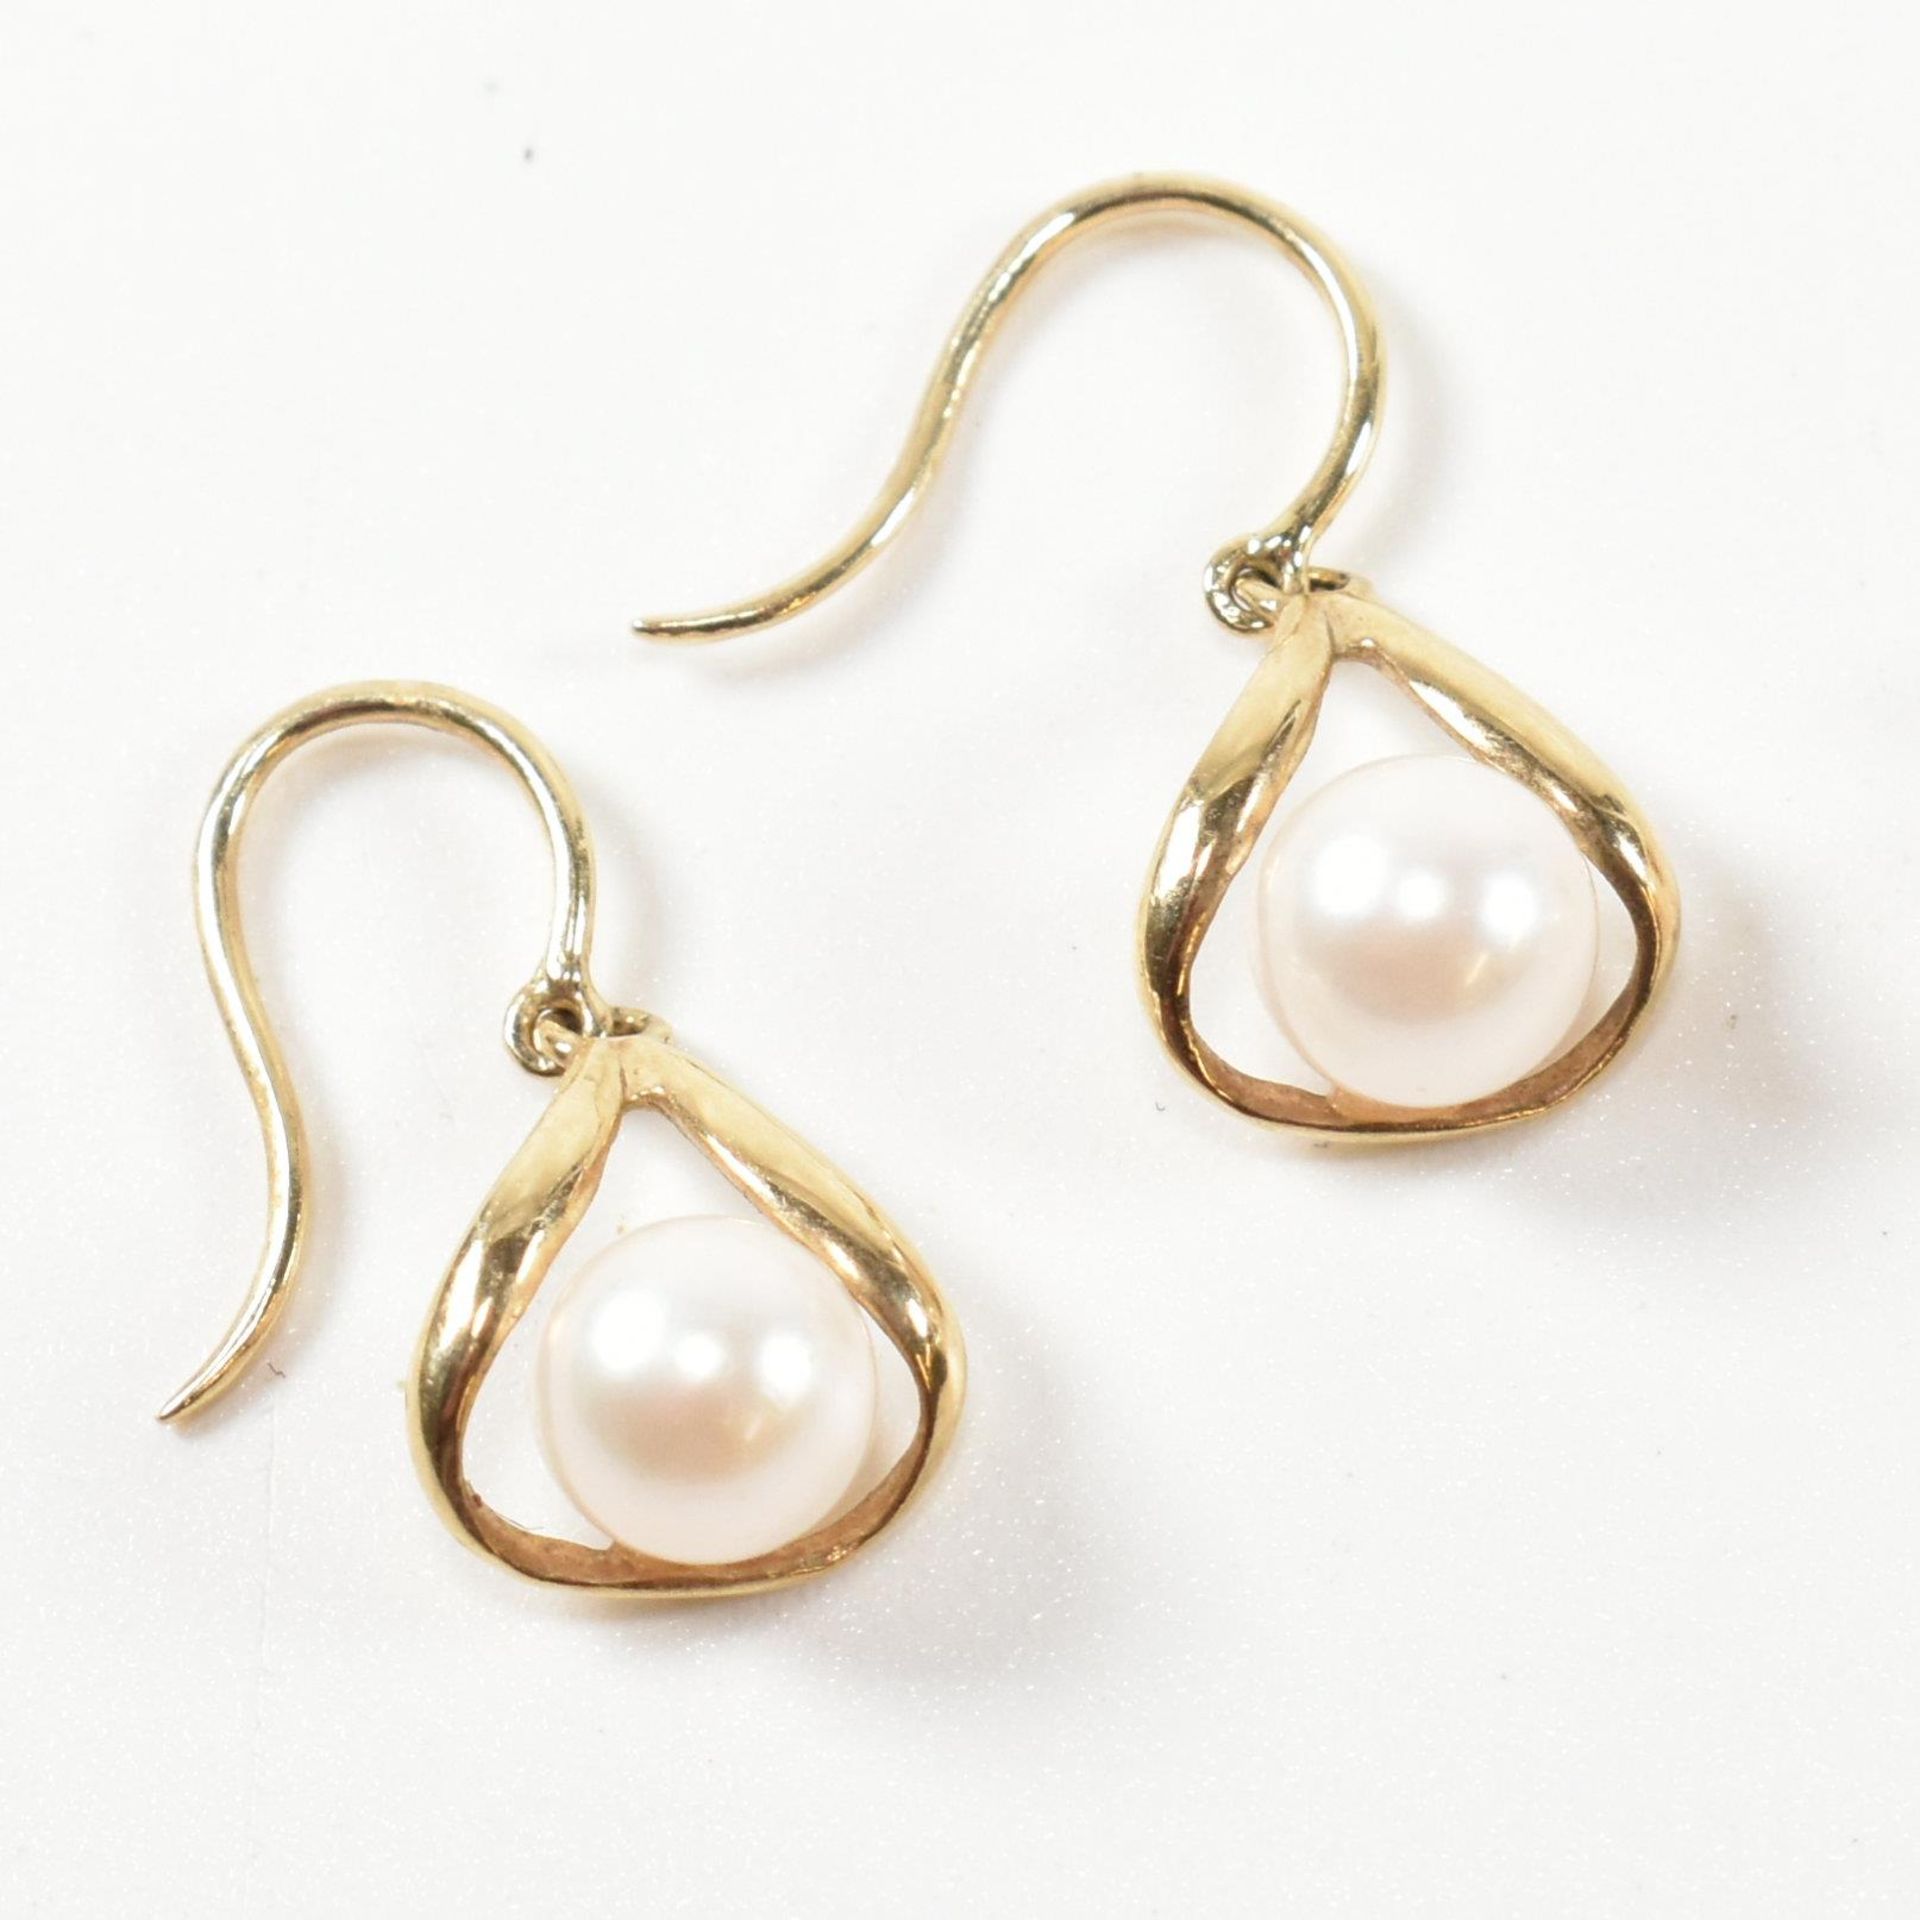 TWO PAIRS OF GOLD & CULTURED PEARL EARRINGS - Image 2 of 6